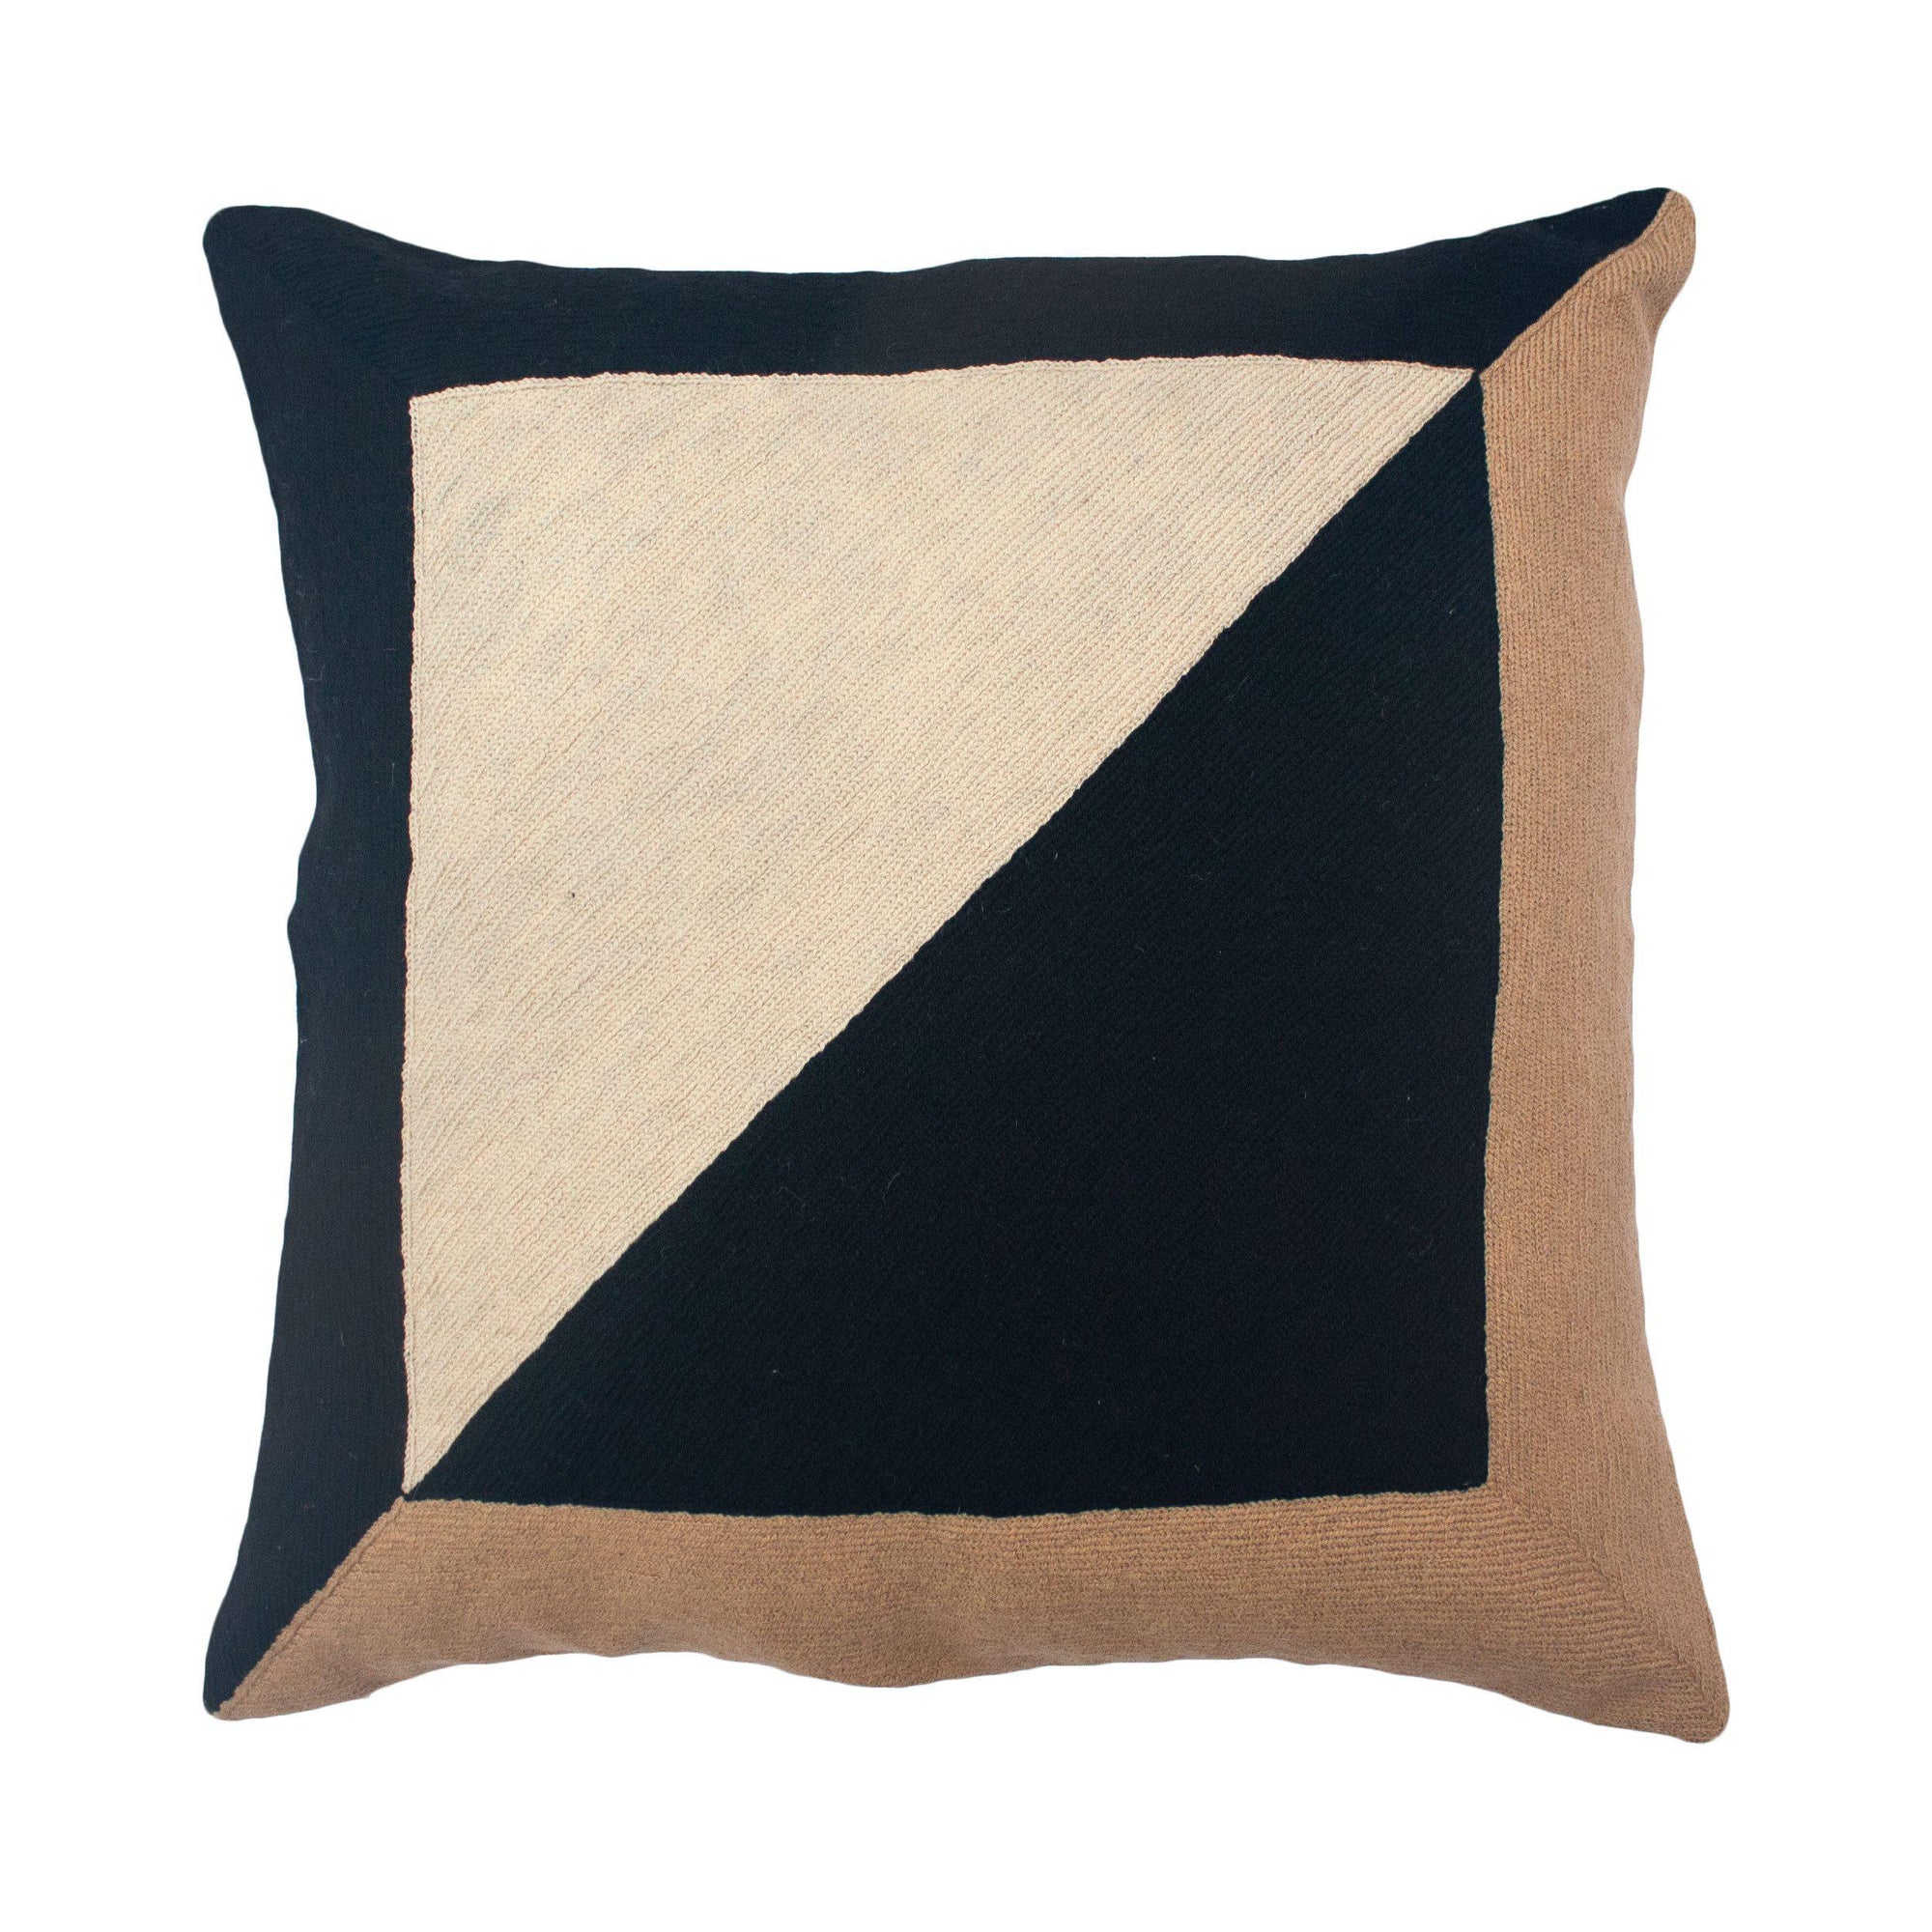 Rugs by Roo | Leah Singh Marianne Square Pillow - Black-H17MAE09